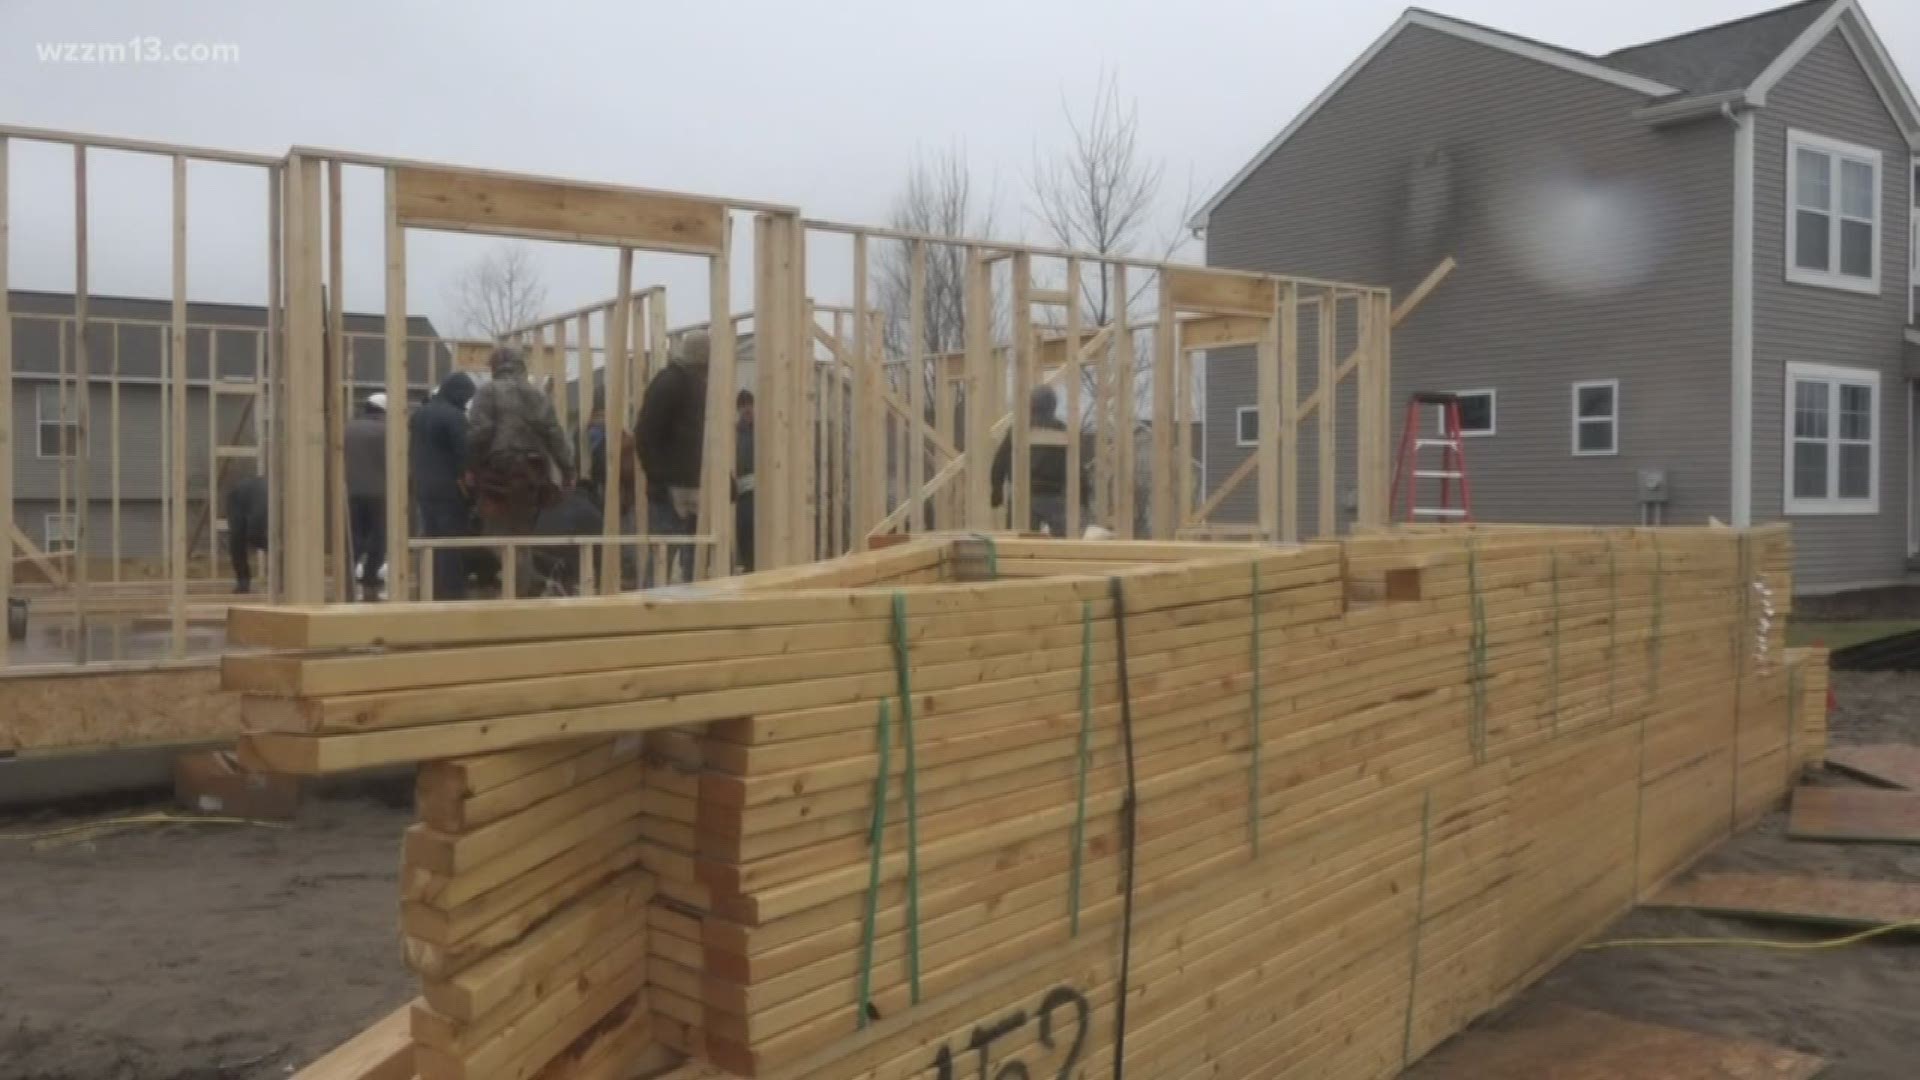 Lakeshore Habitat for Humanity is helping the Swieringa family build a new home with $11,000 raise by SpartanNash and their customers throughout the area.